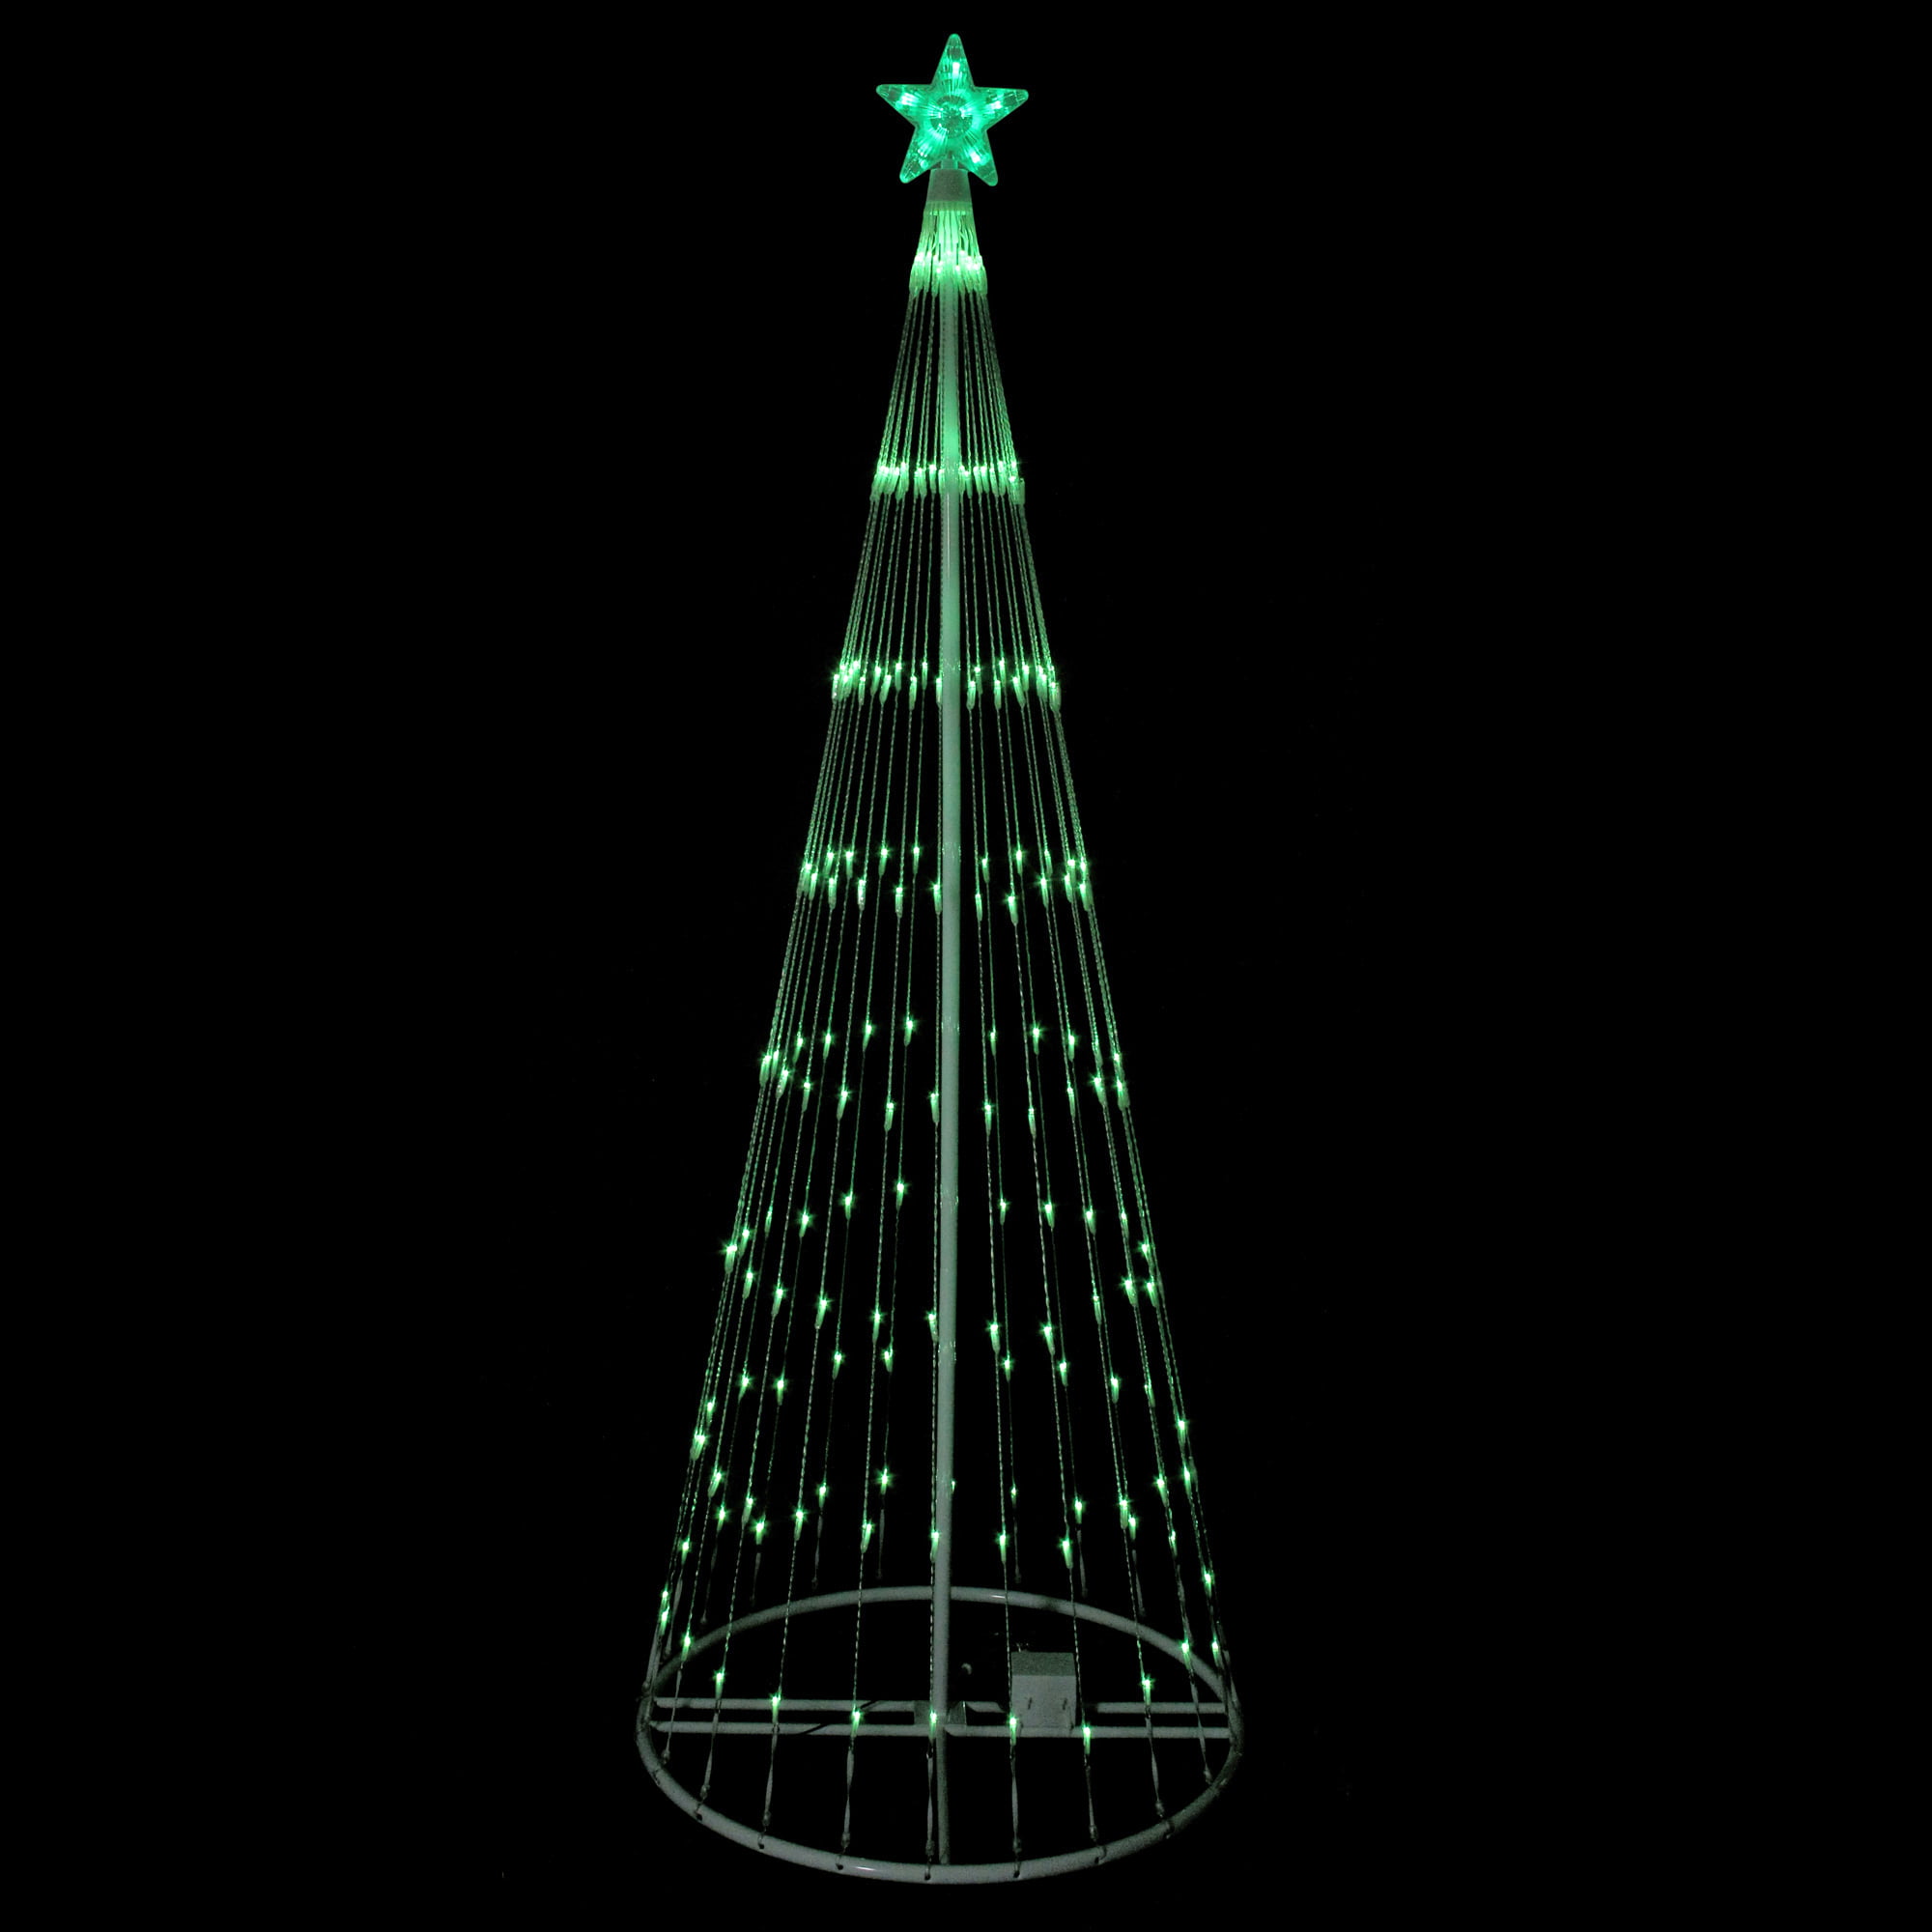 12' Green LED Lighted Show Cone Christmas Tree Outdoor Decoration - Walmart.com